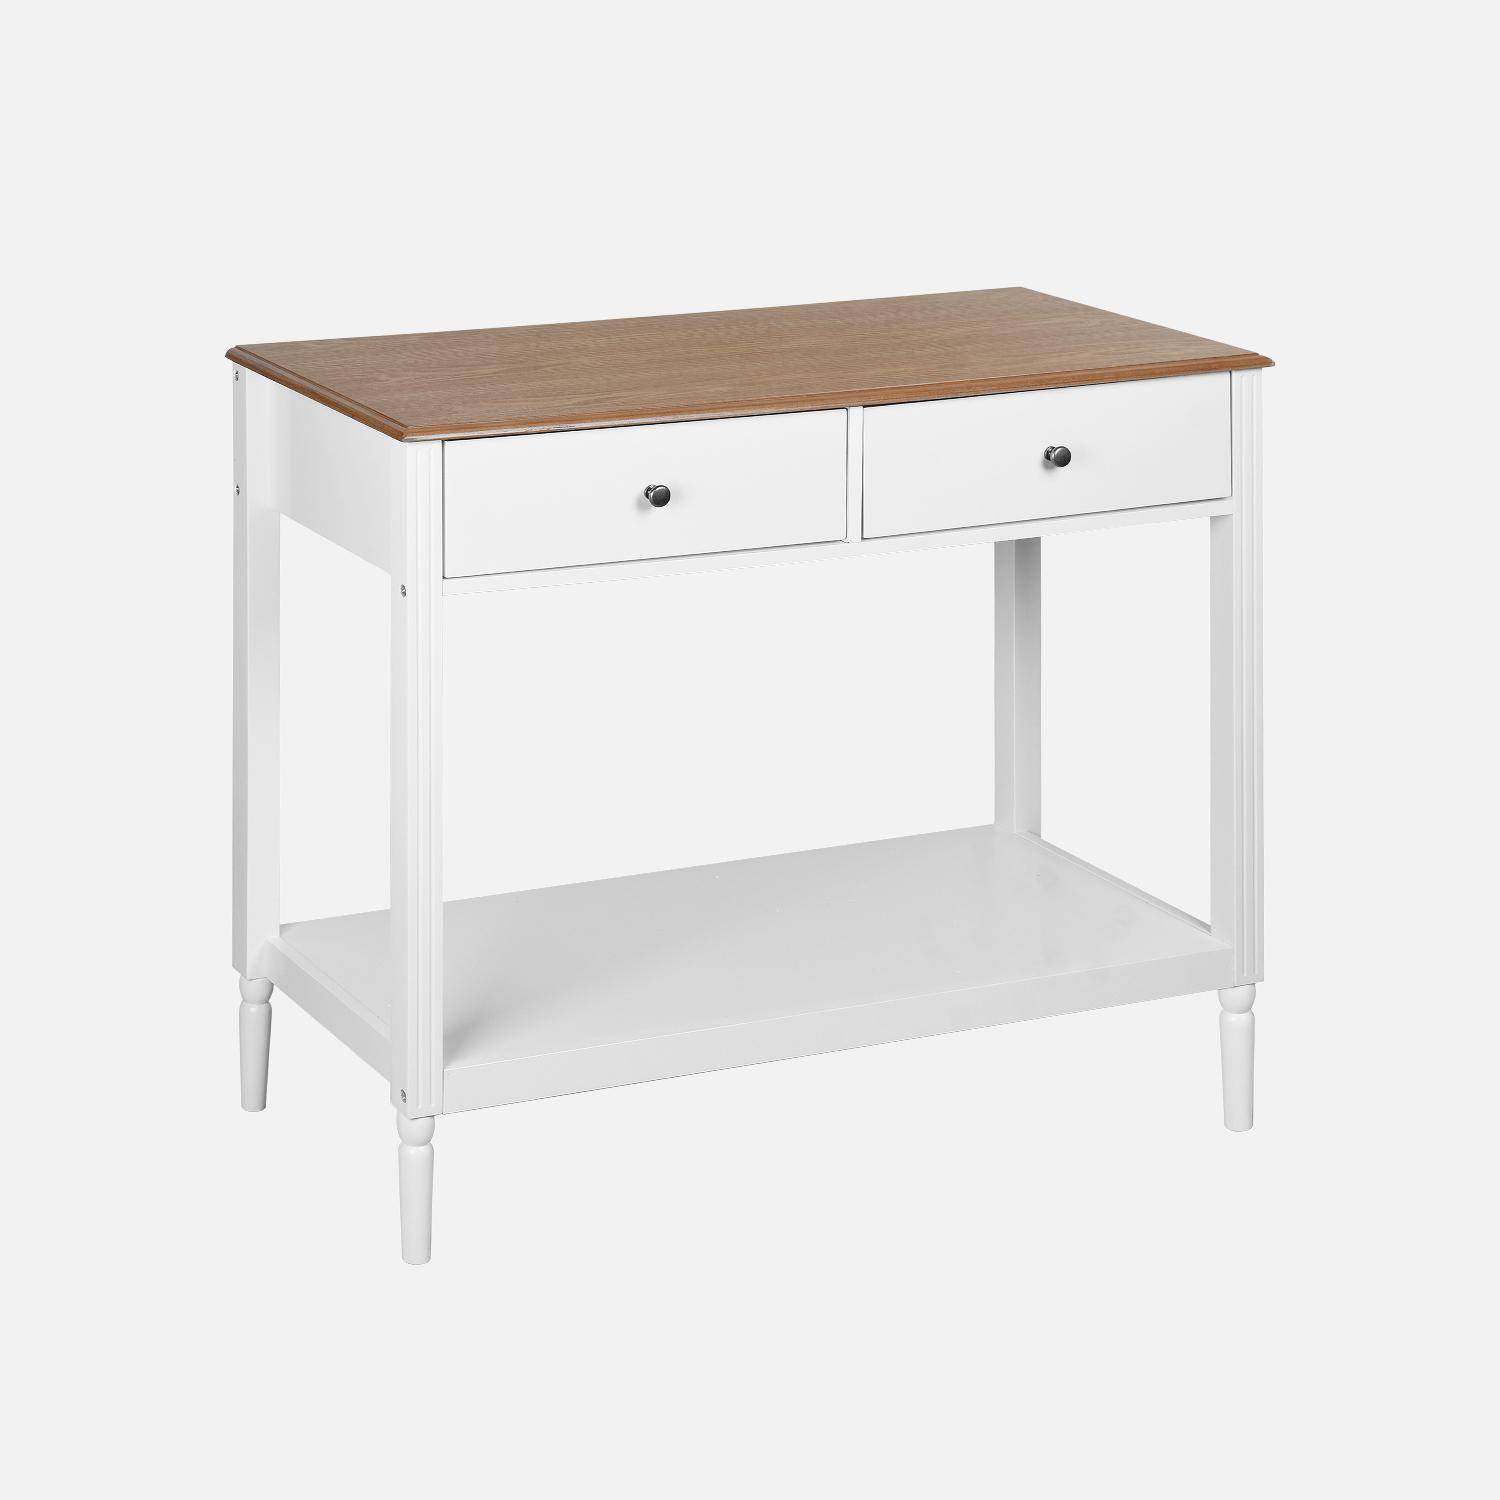 Console table with pinewood legs, 110x40x85cm, Celeste, White Photo3